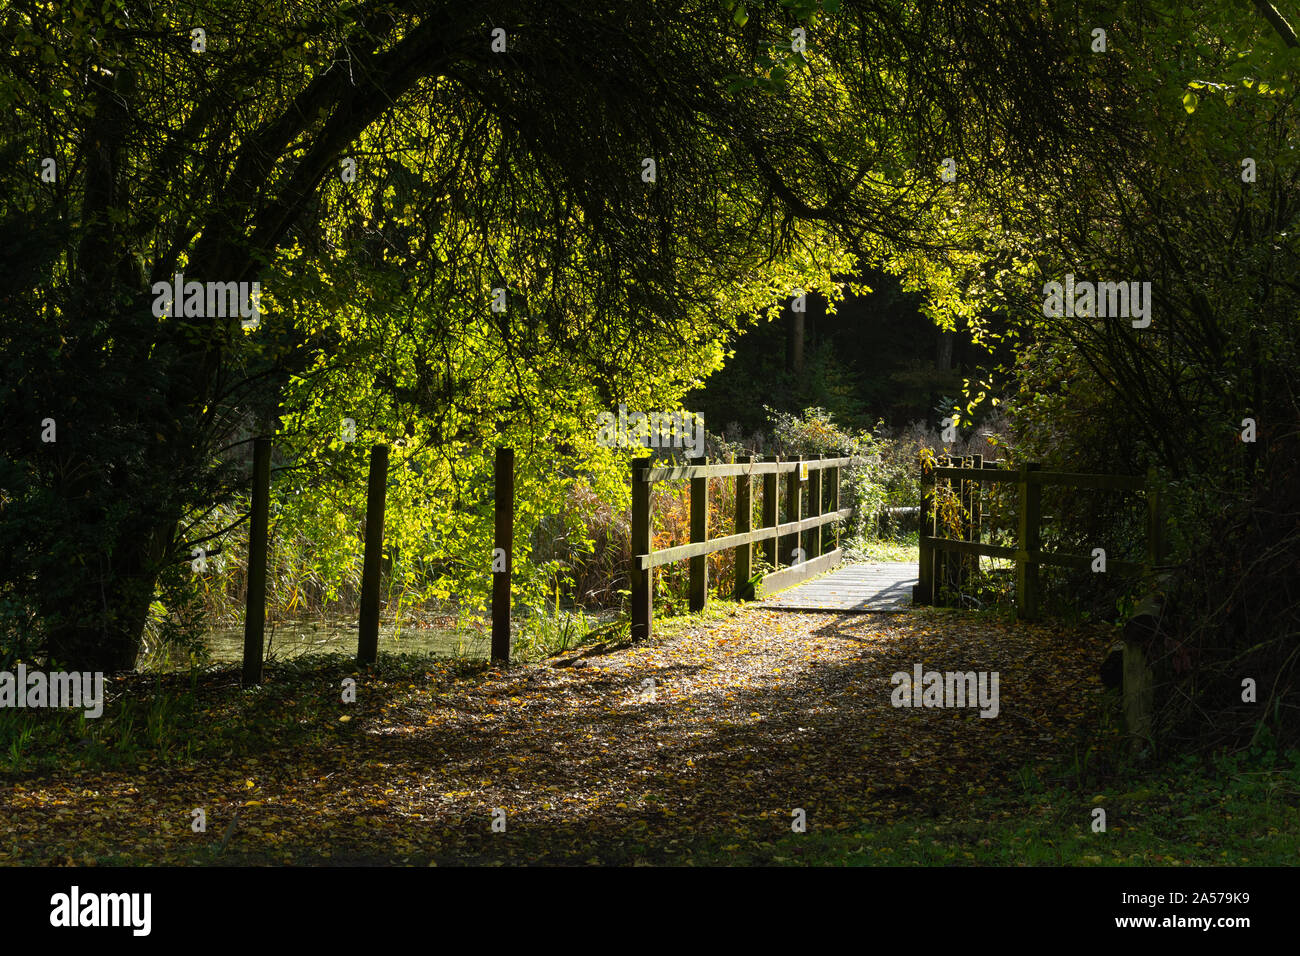 Queen Elizabeth Country Park in the South Downs National Park, Hampshire, UK. Autumn view of the pond and footbridge near the visitor centre. Stock Photo